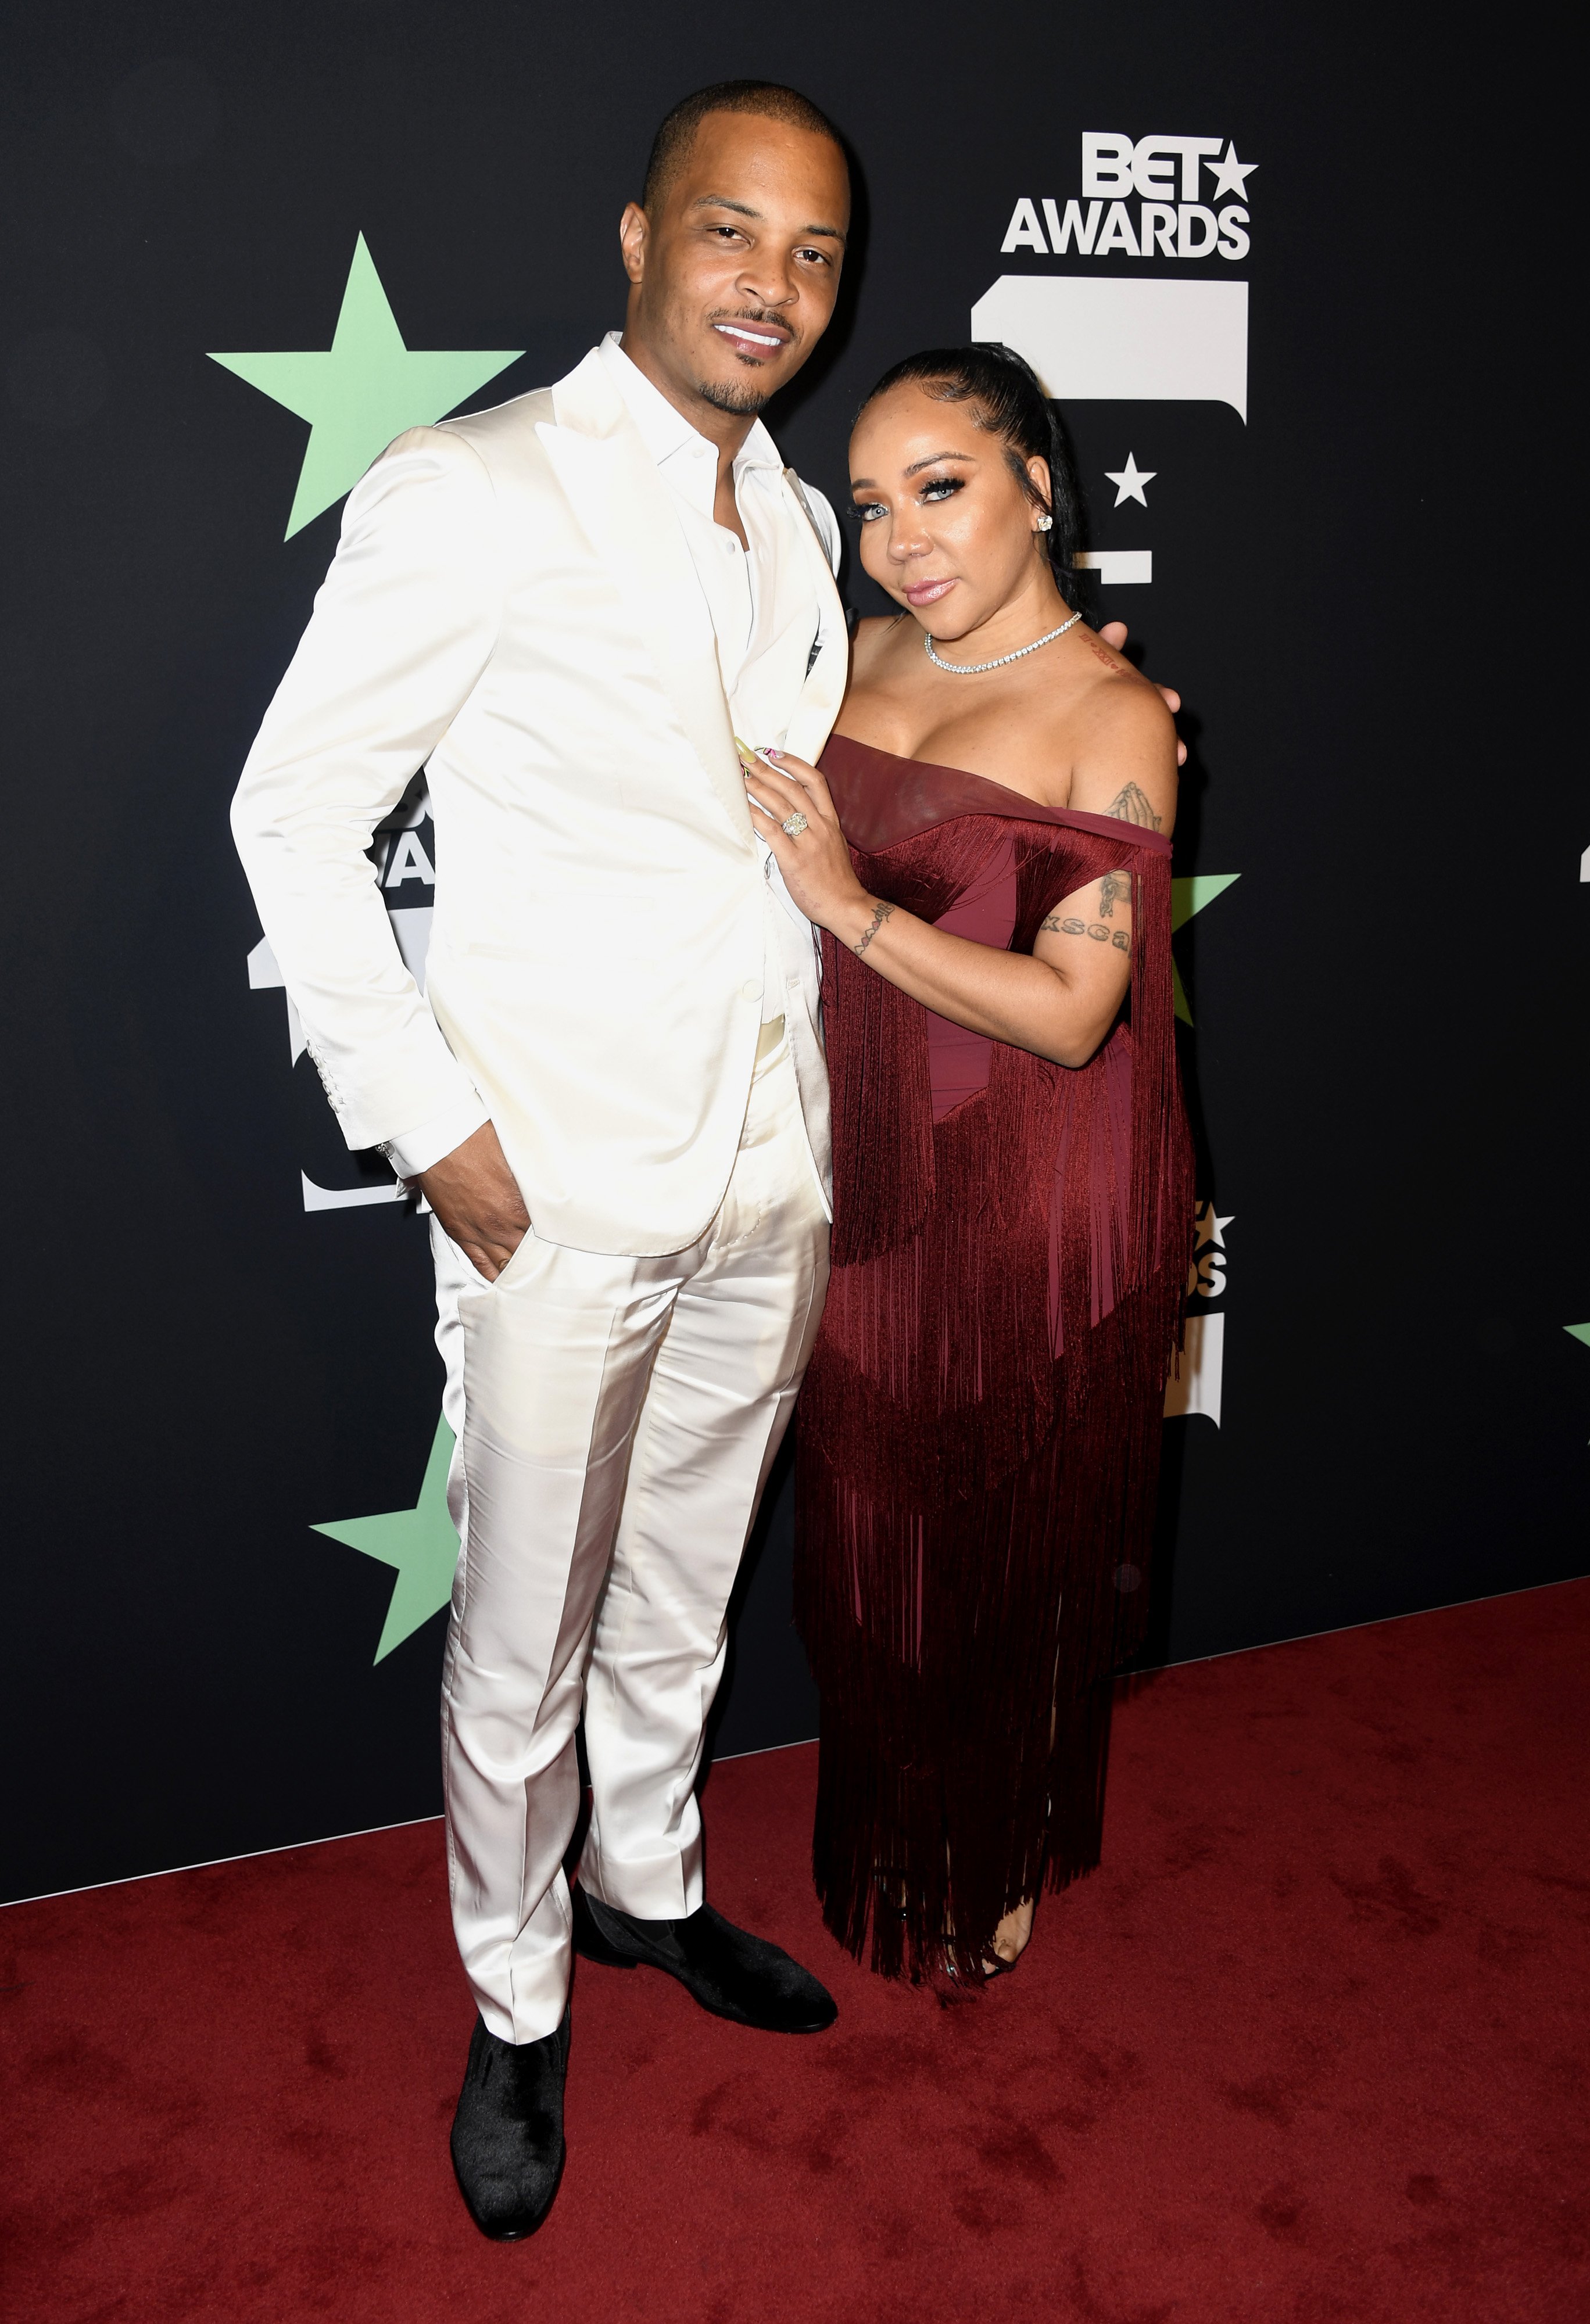  T.I. & Tameka "Tiny" Harris pose in the press room at the 2019 BET Awards on June 23, 2019.| Photo: GettyImages